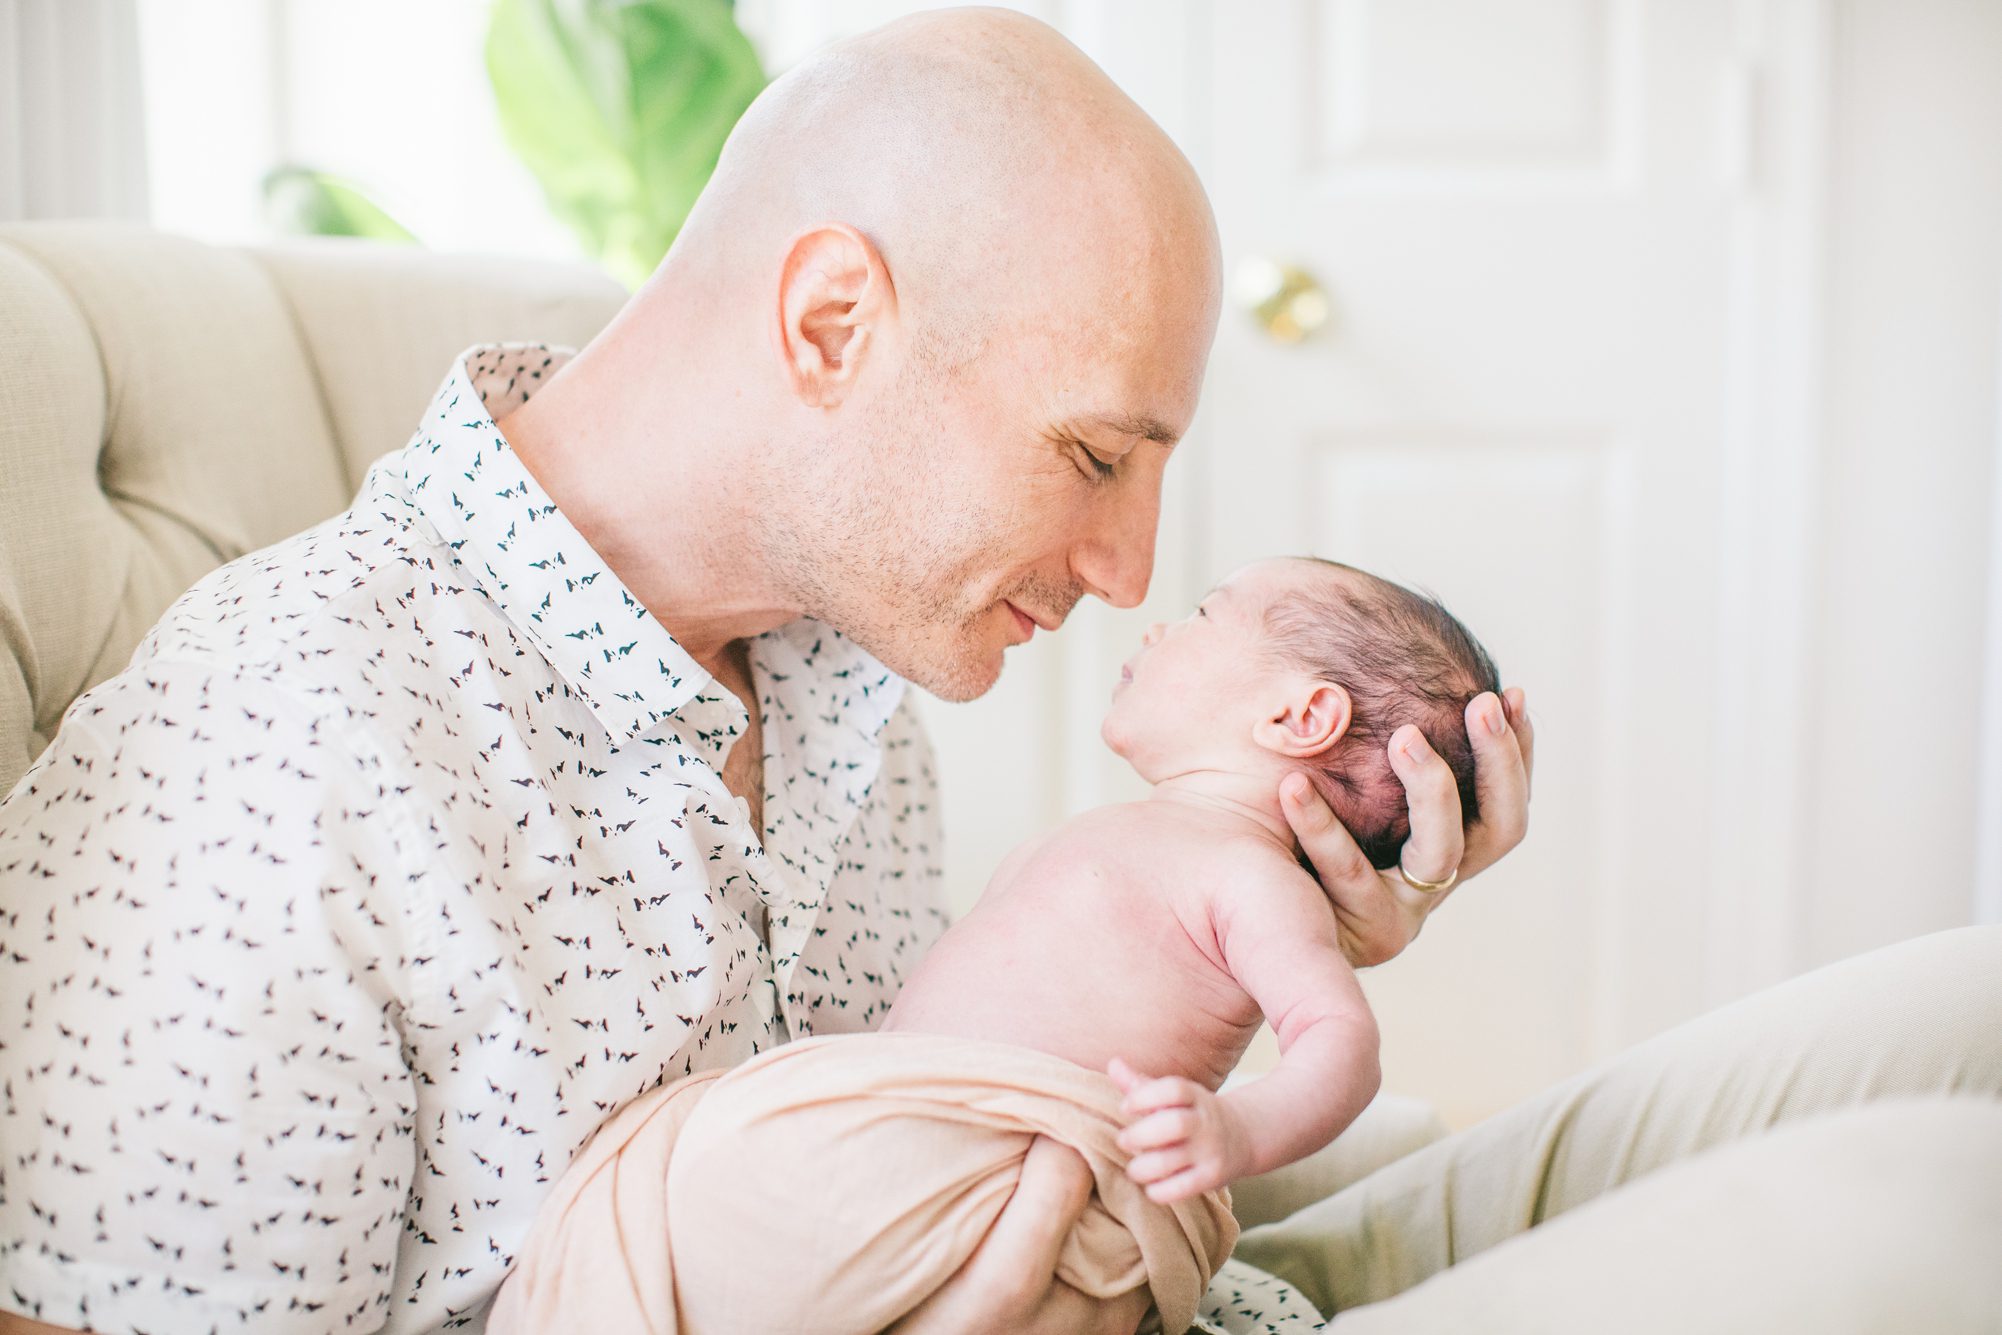 Dad holding newborn near his face and smiling at her during newborn session. Photo by LRG Portraits.